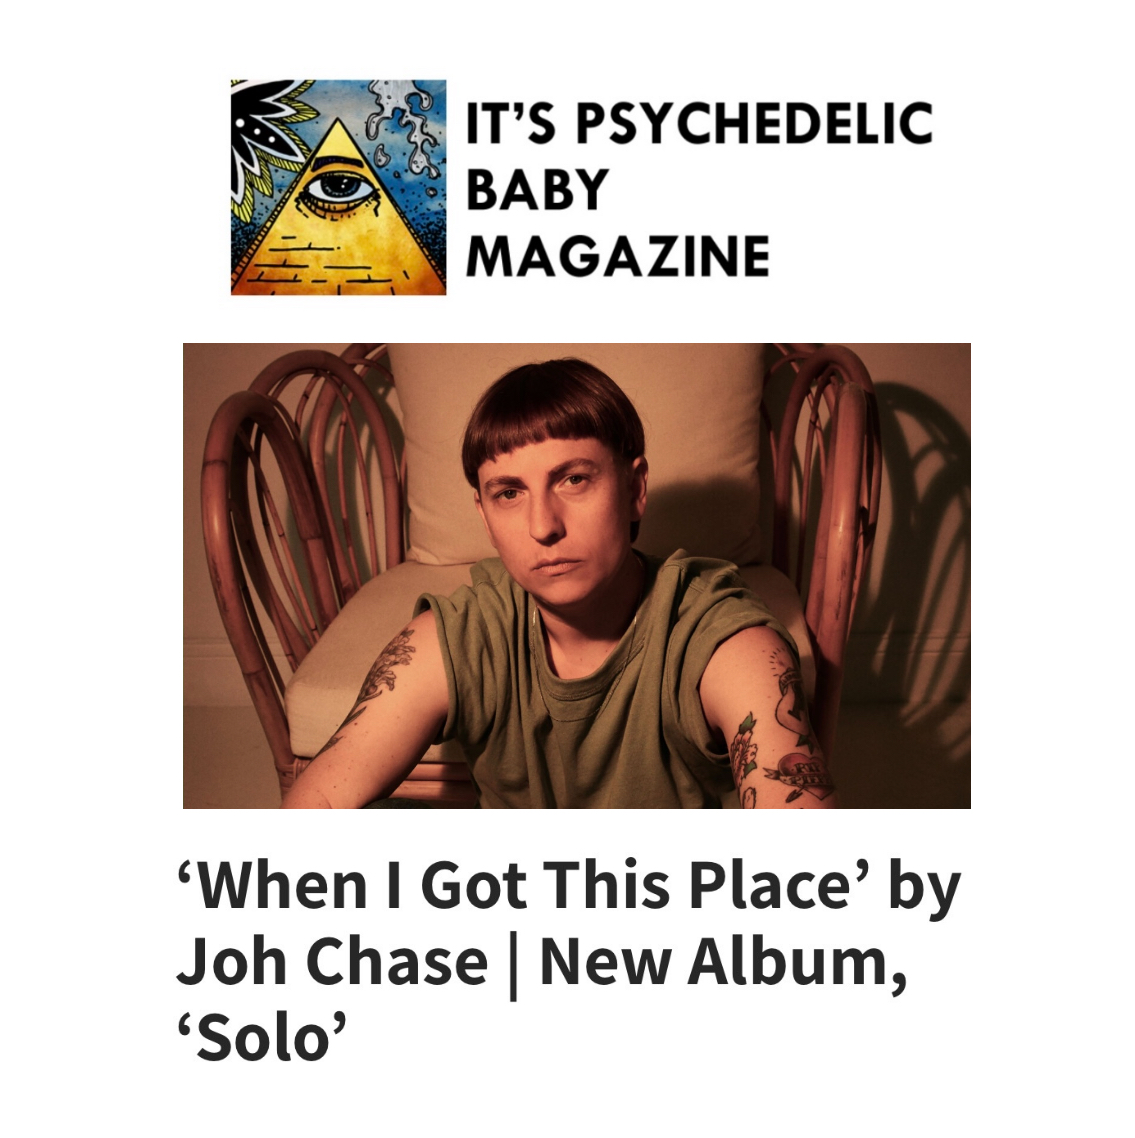 VIDEO PREMIERE

#JohChase's video for 'When I Got This Place' is premiering now exclusively at @PsychedelicMag! Be one of the first to experience the latest offering from Chase's new album 'Solo' (4/26) ahead of the official release tomorrow on KRS.

psychedelicbabymag.com/2024/03/when-i…